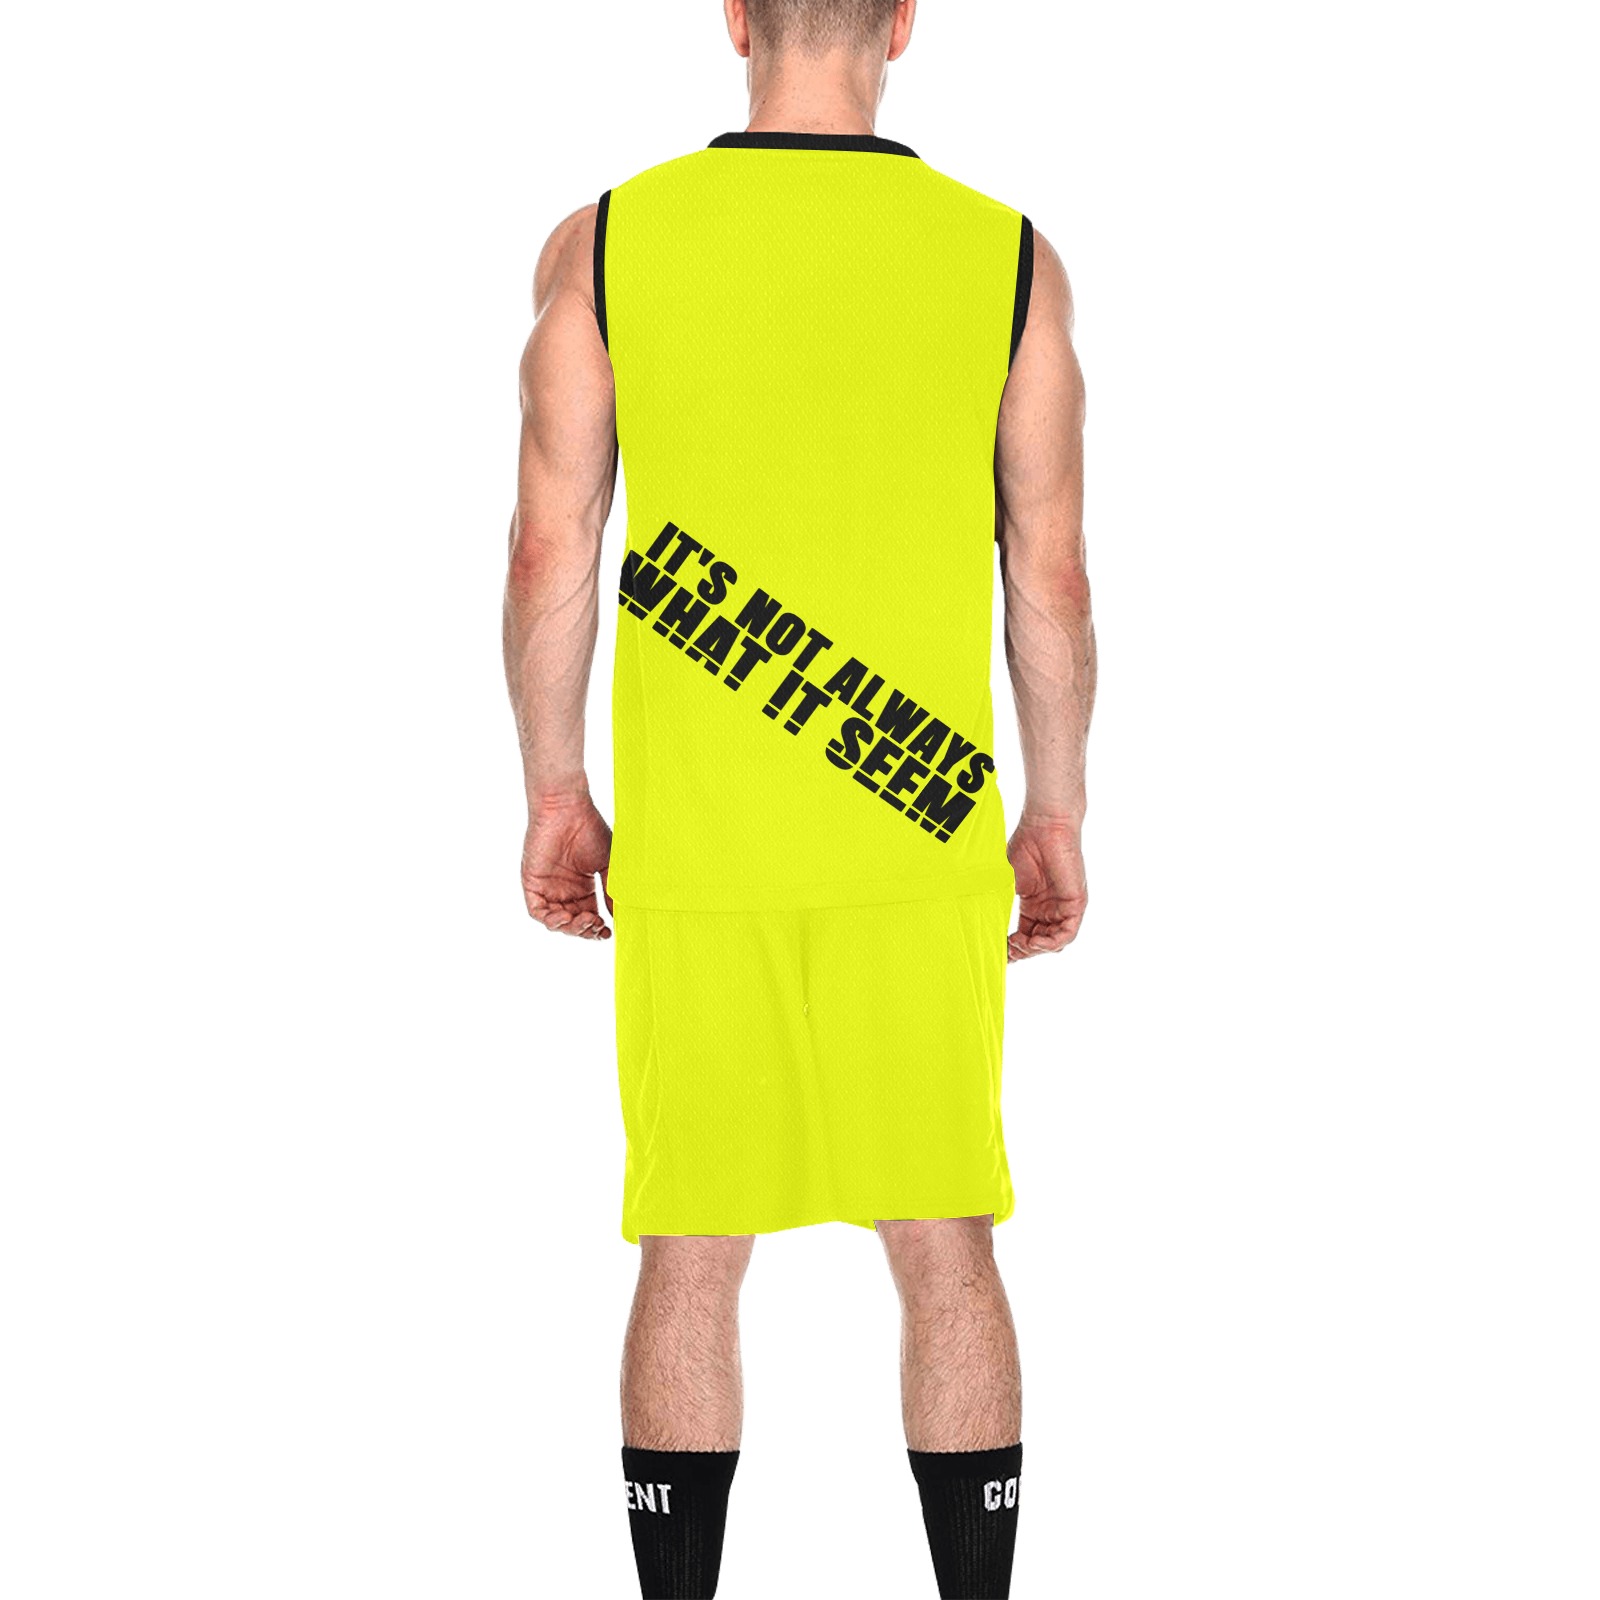 Designs only-its not always what it seem copy All Over Print Basketball Uniform